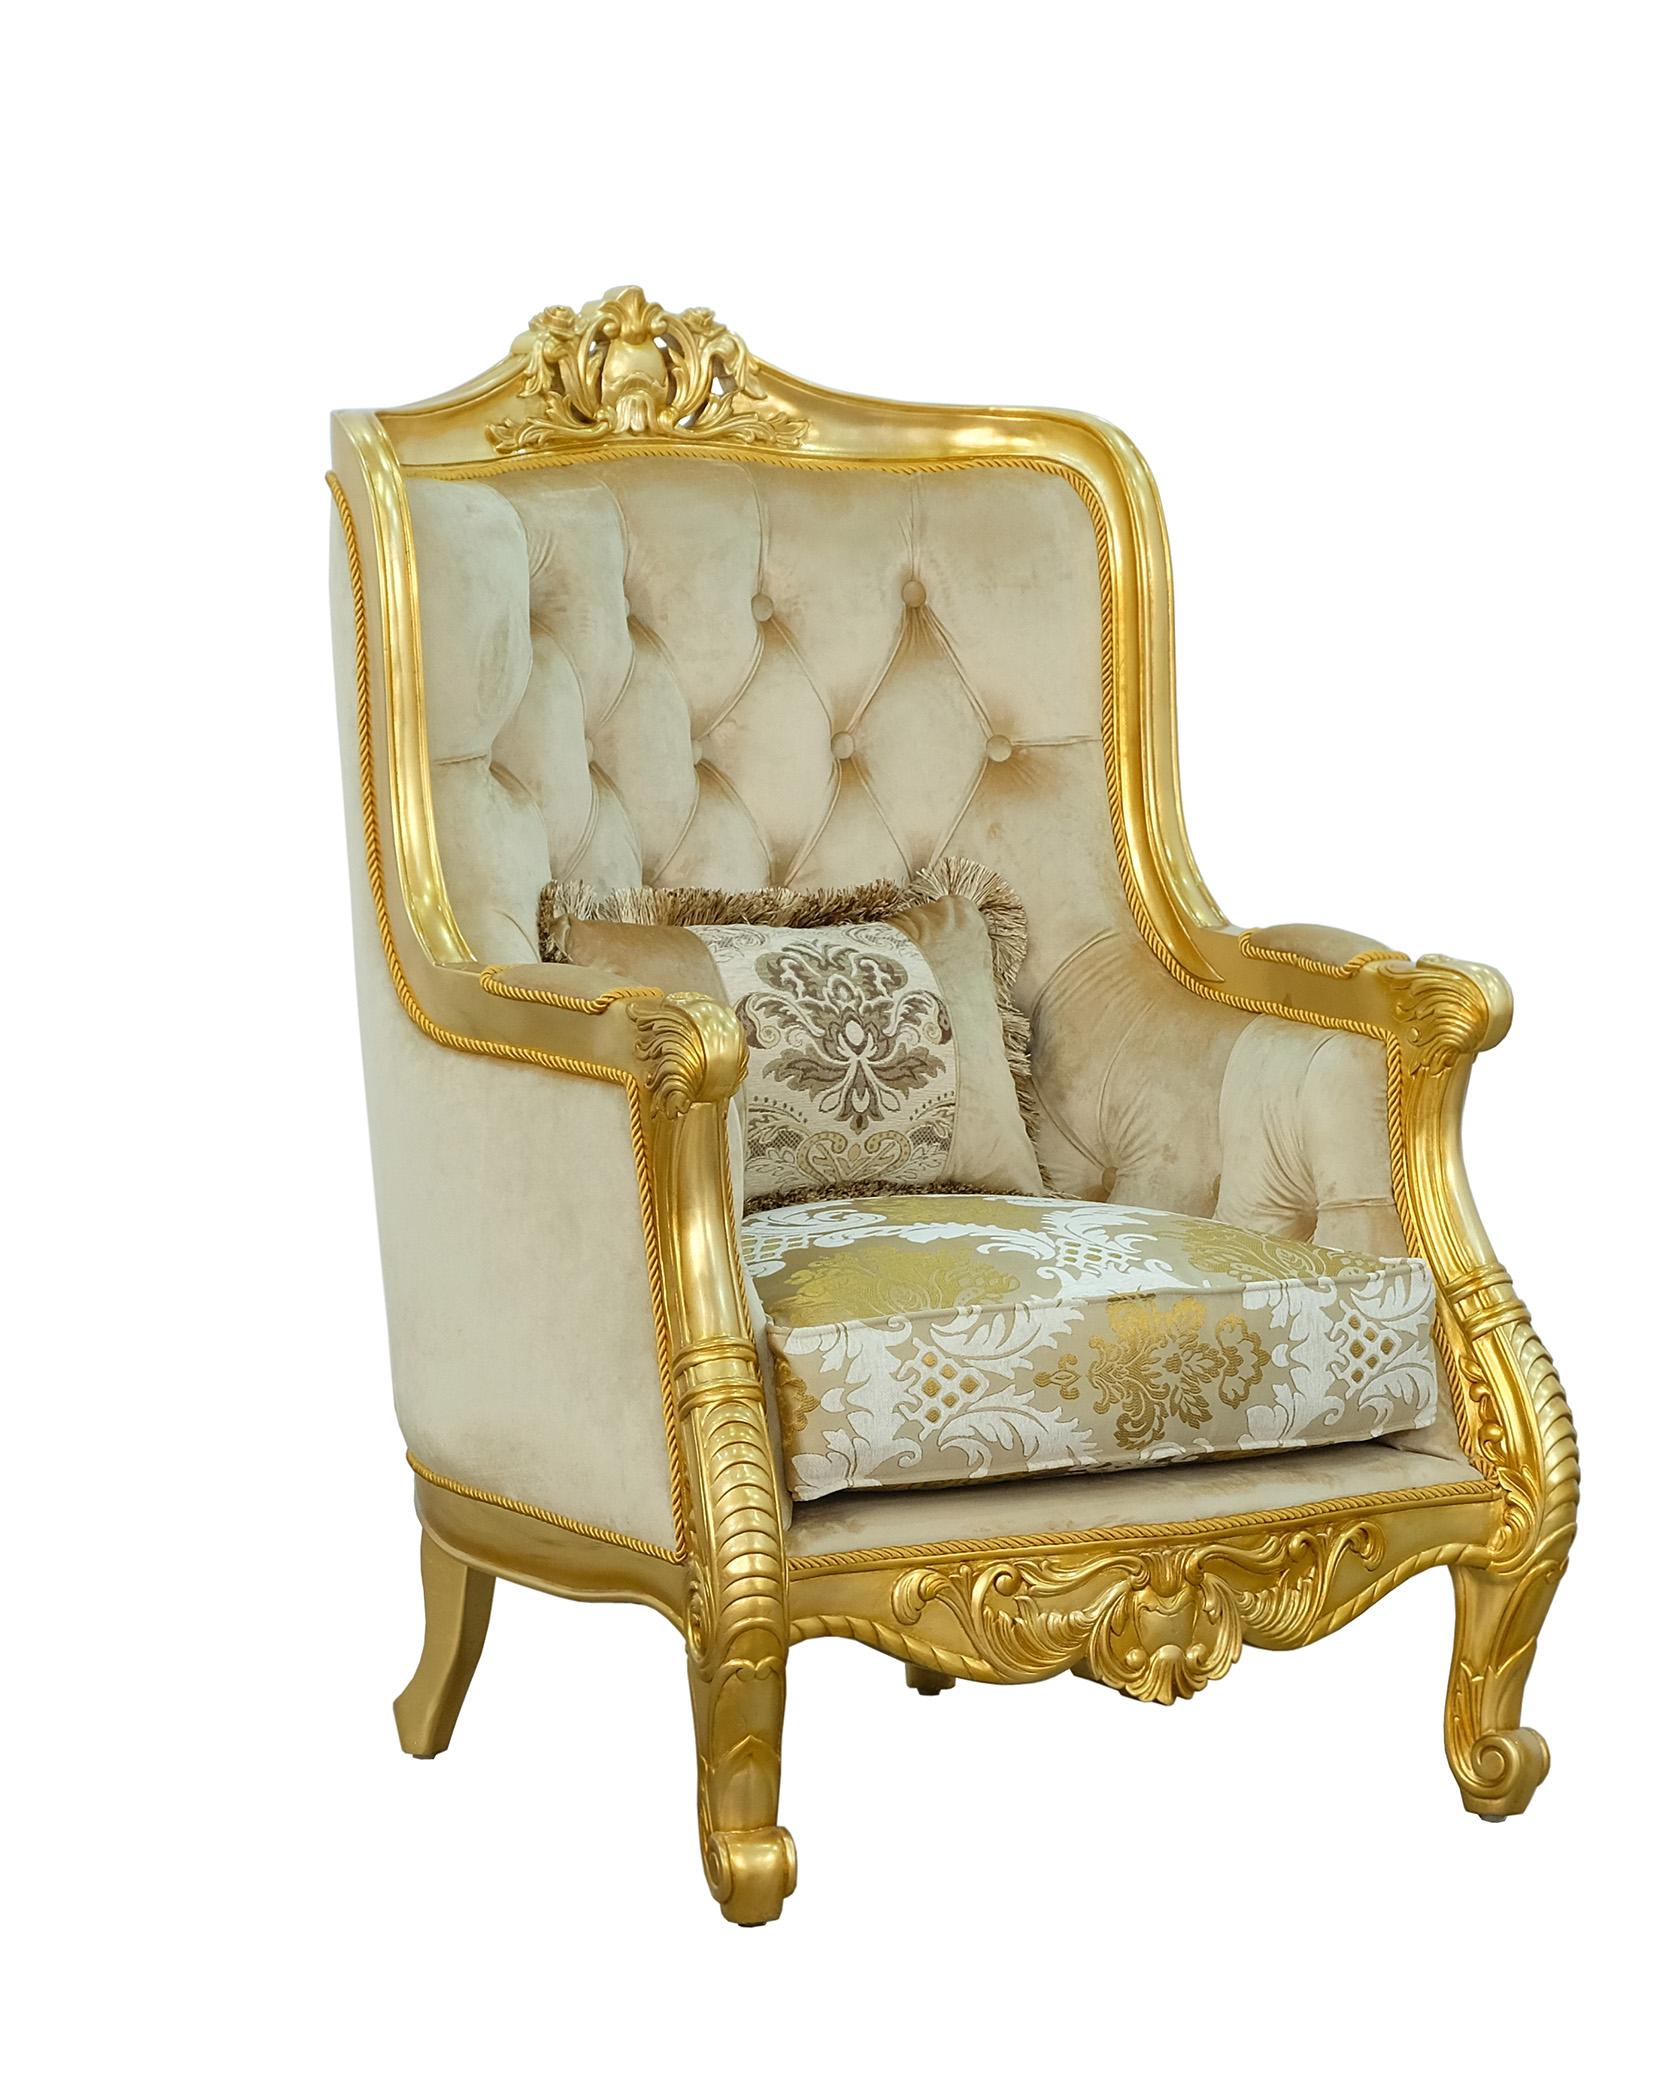 Classic, Traditional Arm Chair LUXOR 668584-C in Ebony, Antique, Mahogany, Gold, Beige Fabric